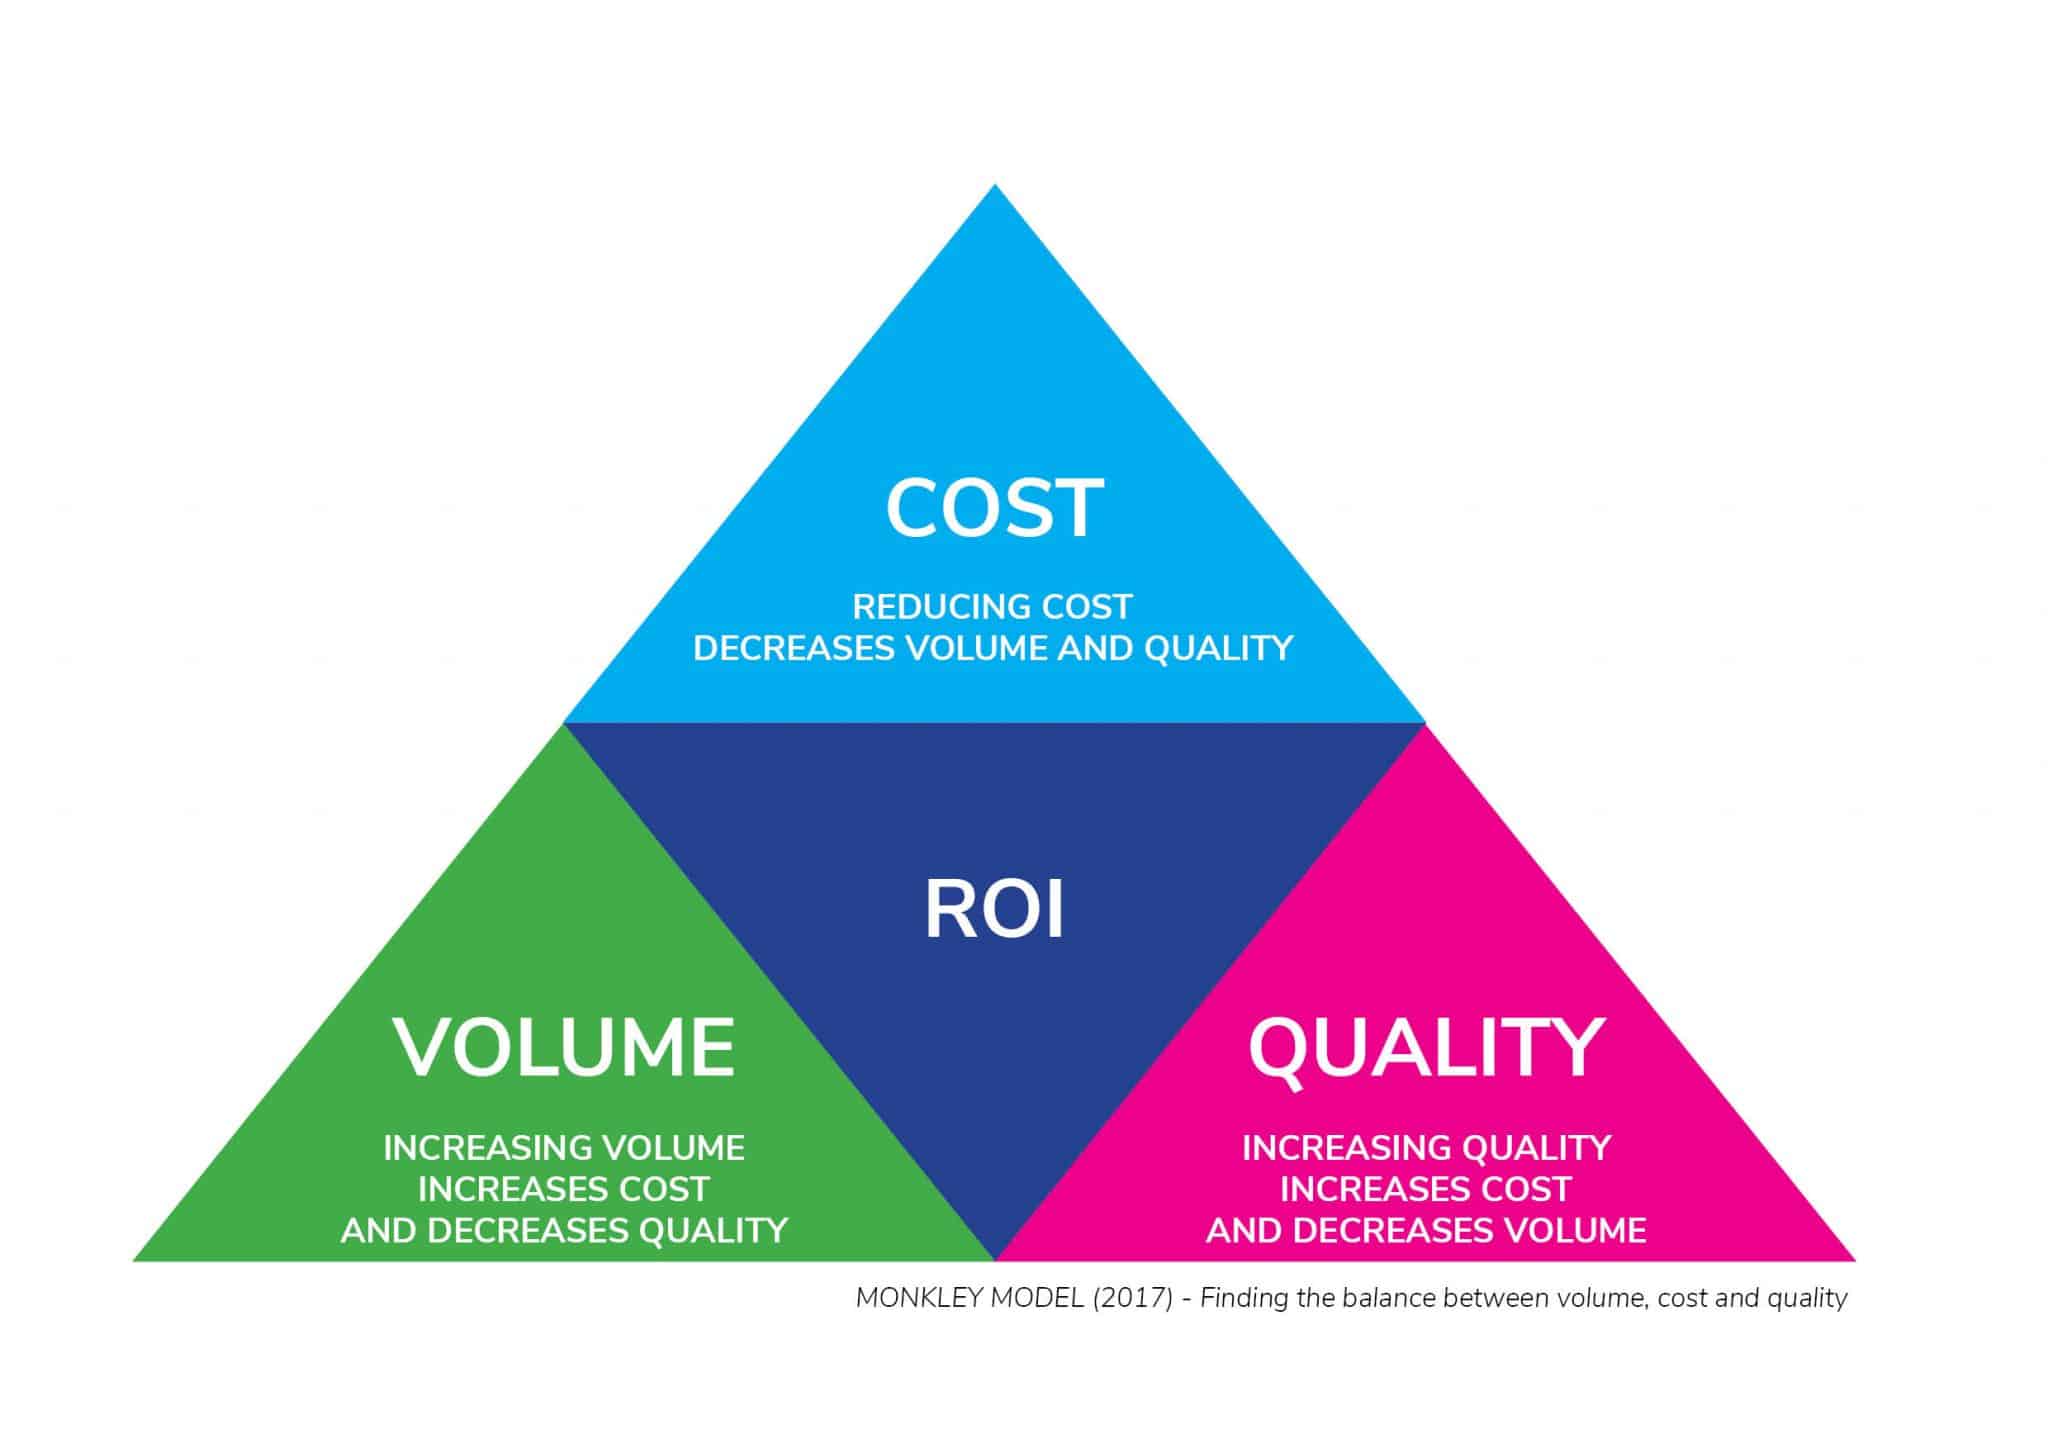 Finding a balance between volume, cost and quality